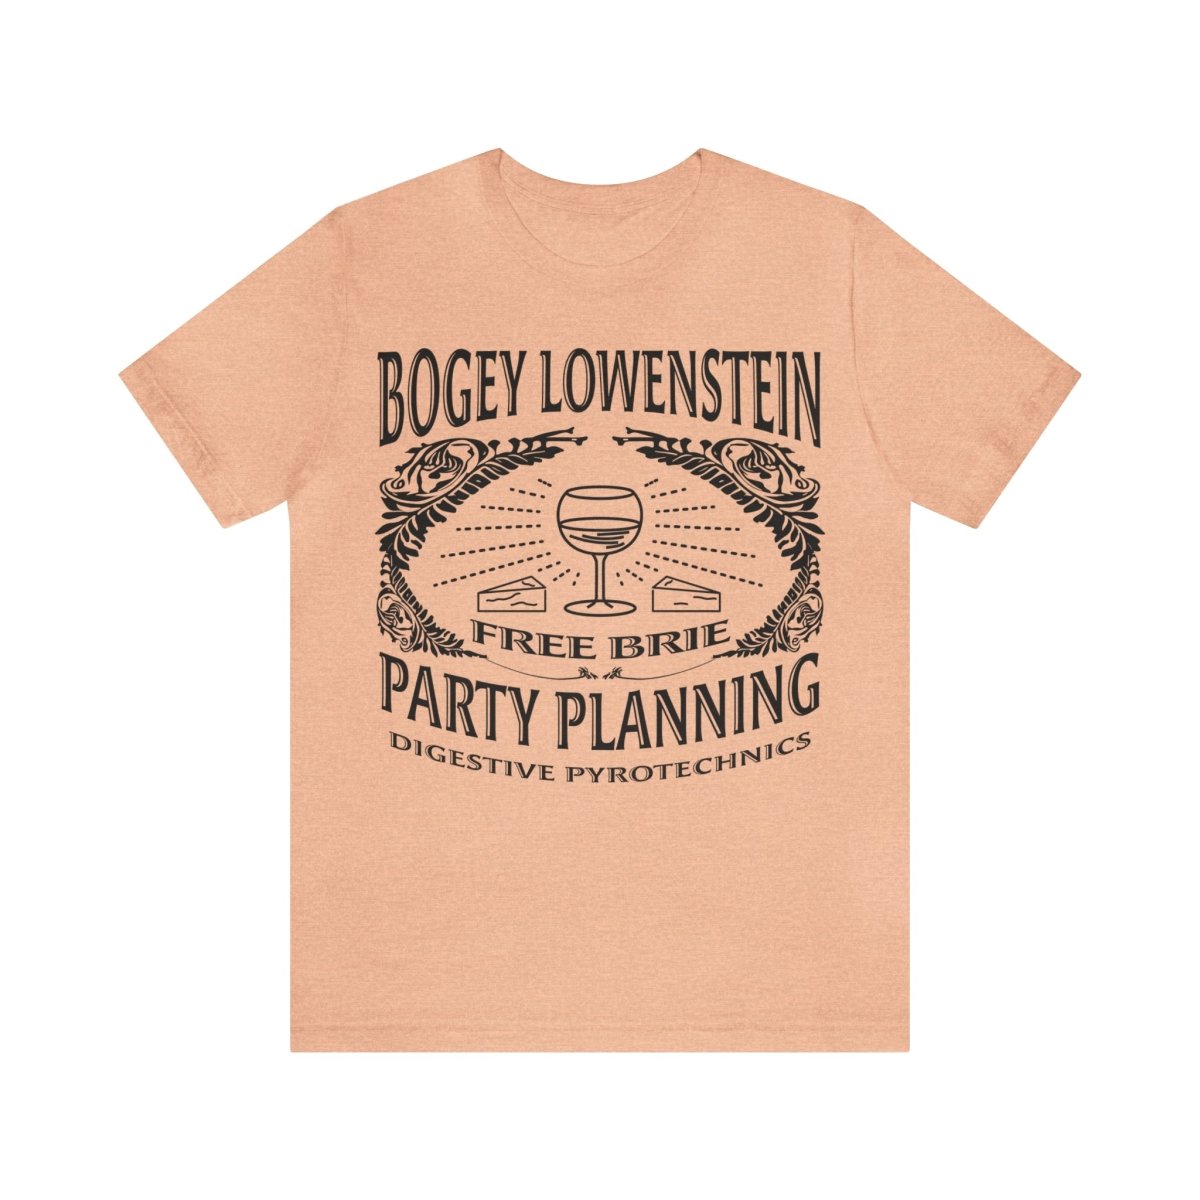 Bogey Lowenstein Premium T-Shirt, Party Planning, Brie Included, Digestive Pyrotechnics, Funny